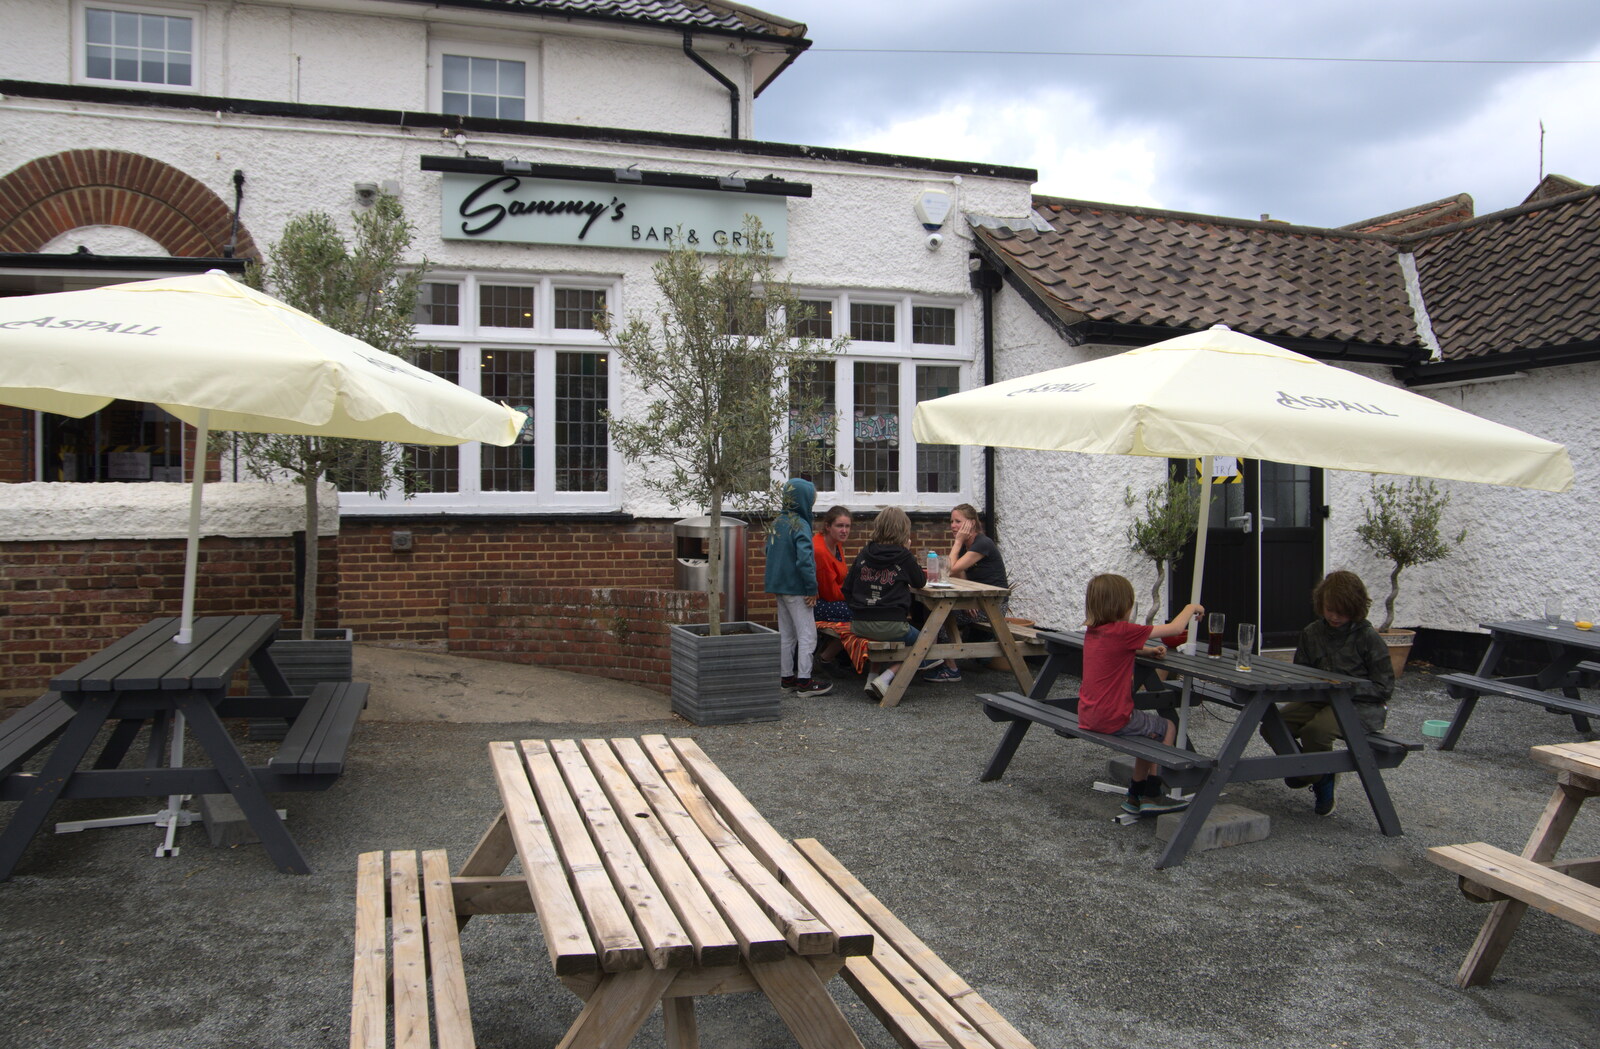 Outside Sammy's Bar and Grill from Camping on the Coast, East Runton, North Norfolk - 25th July 2020